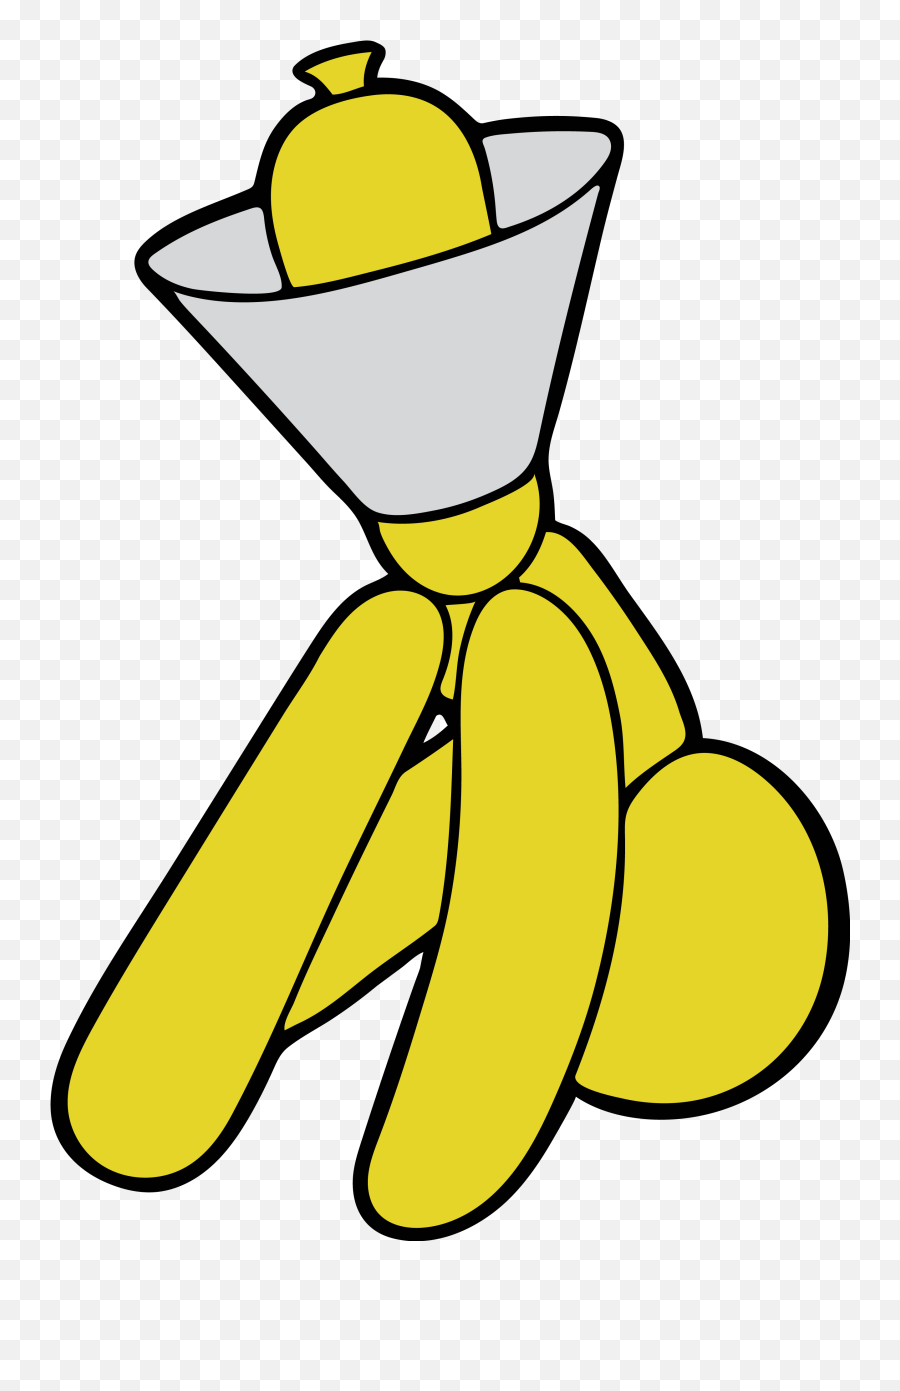 Getting A T - Shirt Logo From The Game Files Gfx Requests Yellow Dog With Cone Png Emoji,Emoji Pop 101